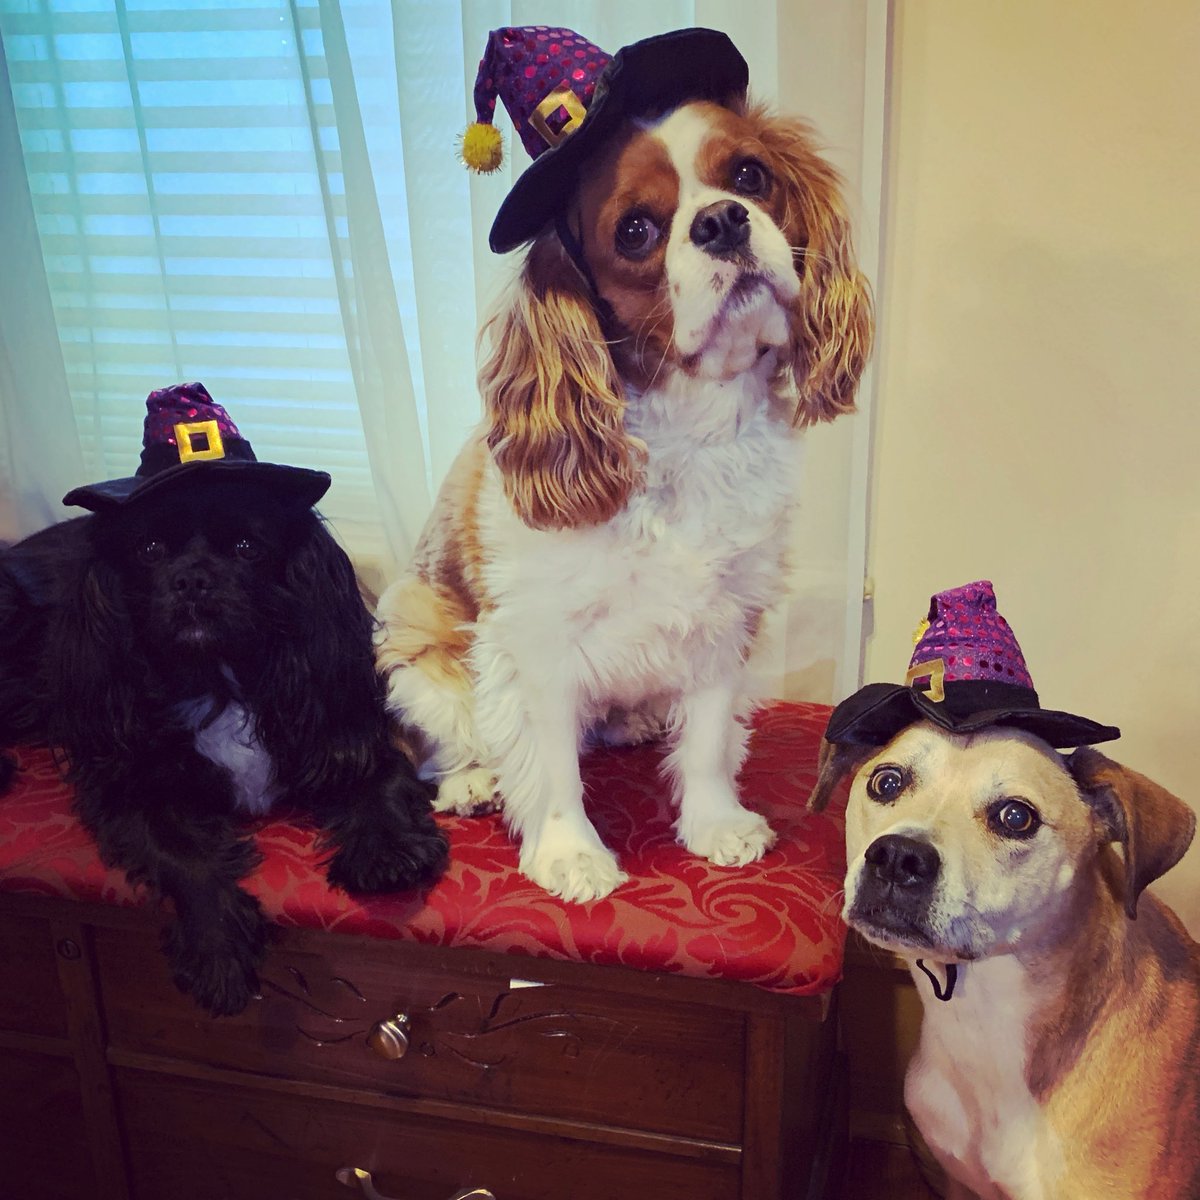 Double, double, toil and trouble / fire burn and cauldron bubble… 🧹🧹🧹 #halloween2021 #Costume #dogcostumes #cavpack #cavalierkingcharles #dogsoftwitter